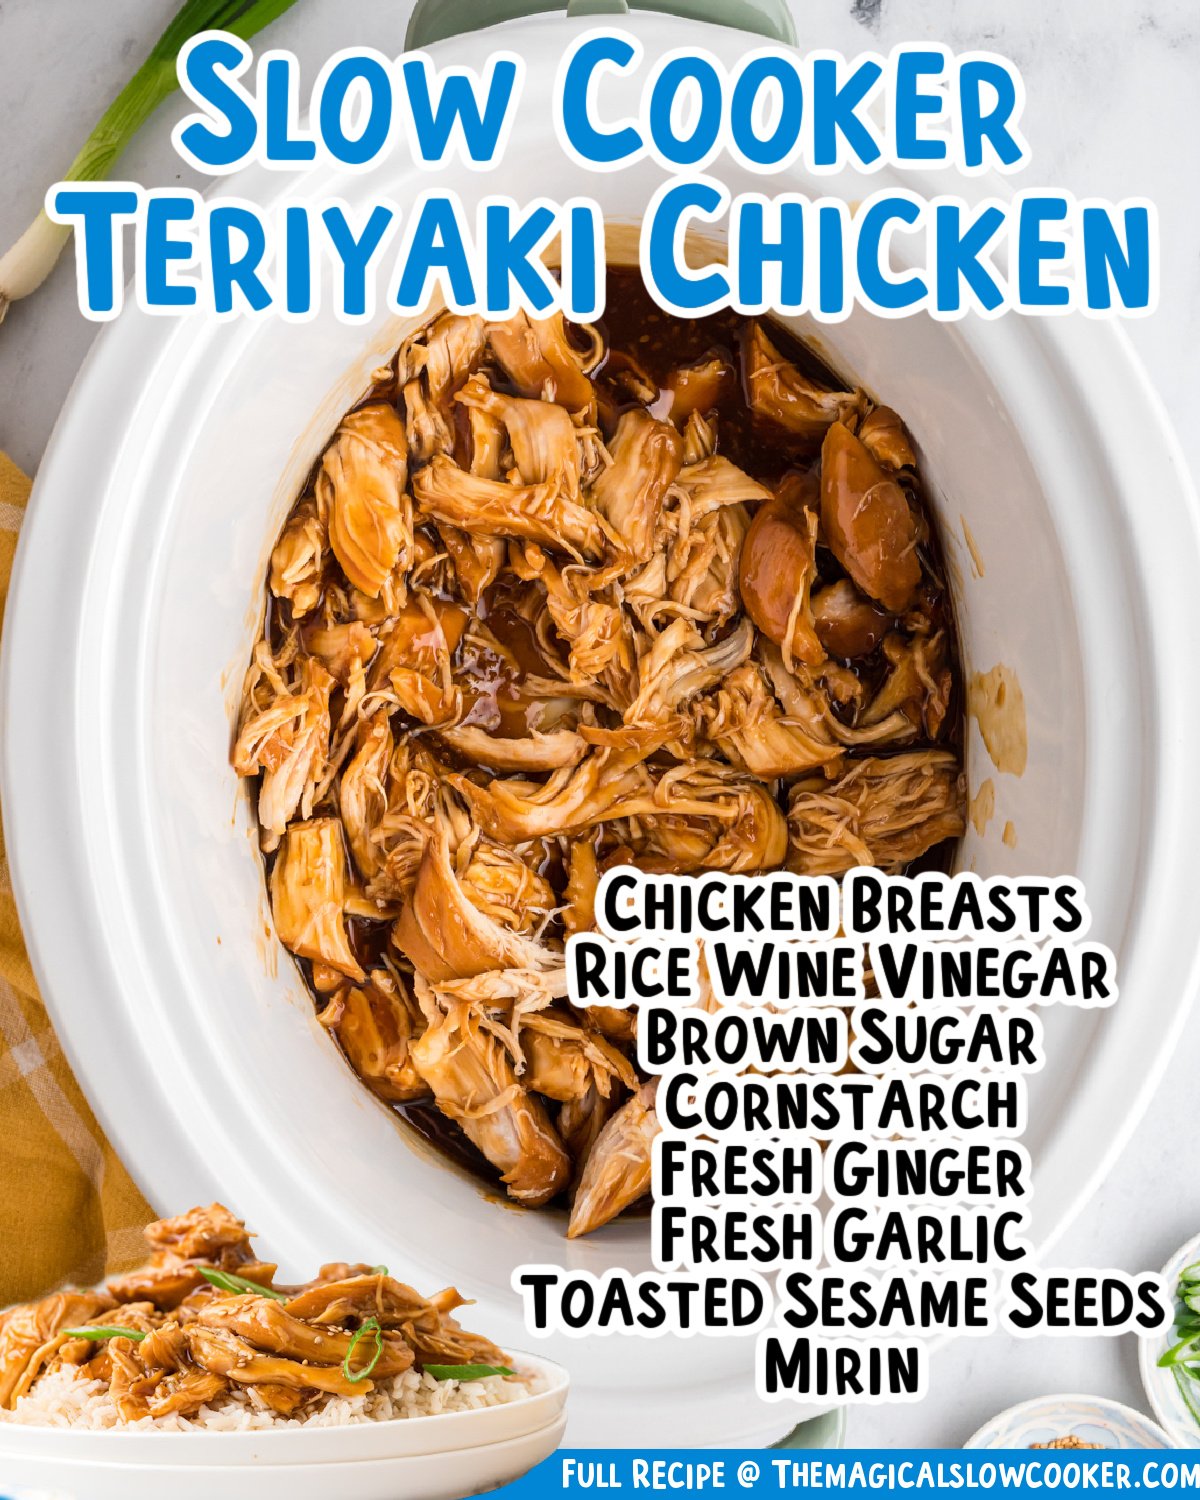 Slow Cooker Teriyaki Chicken - The Magical Slow Cooker